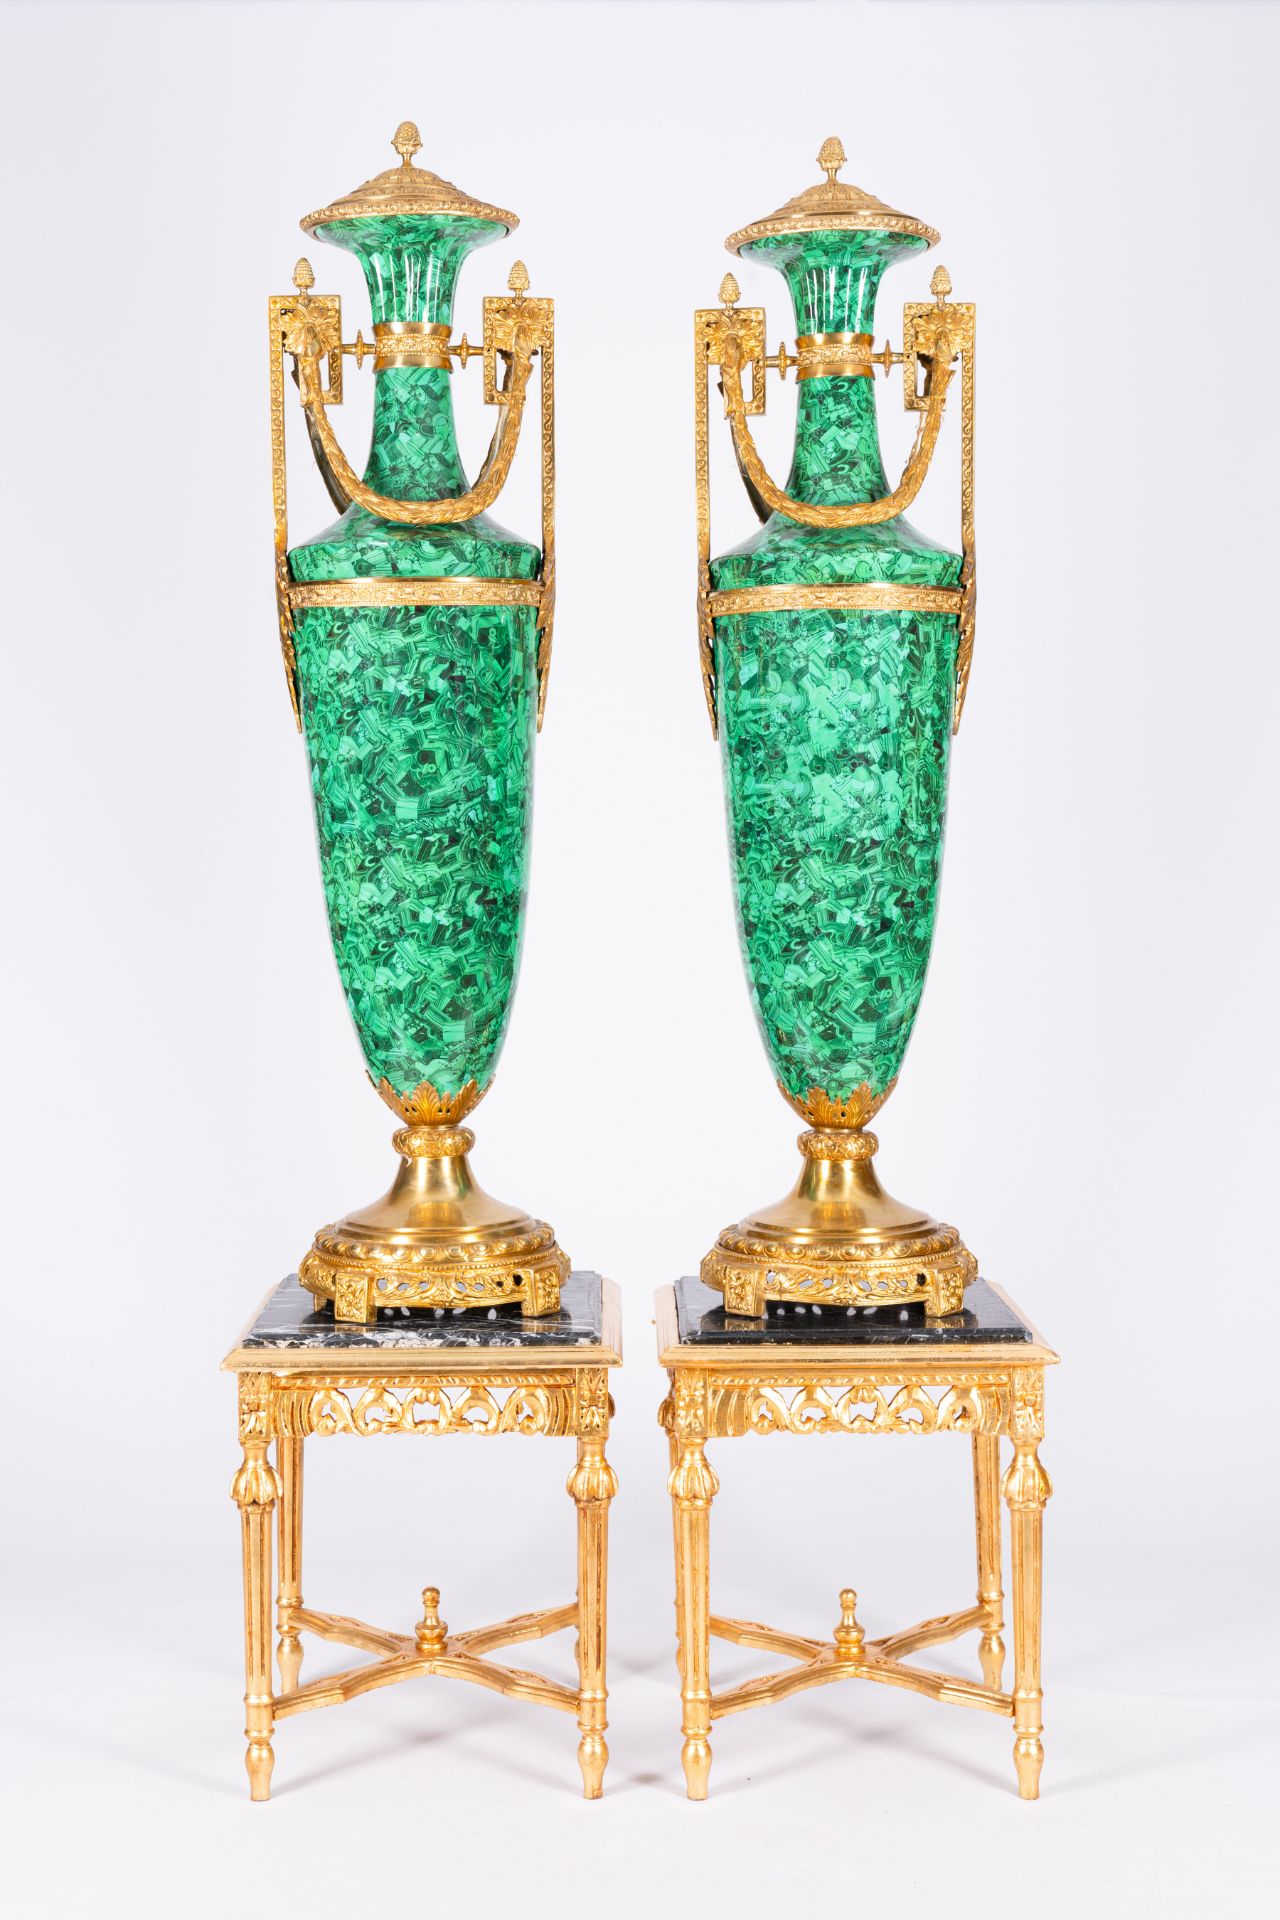 A pair of large gilt bronze mounted faux-malachite vases on matching gilt wood bases with marble top - Image 3 of 4